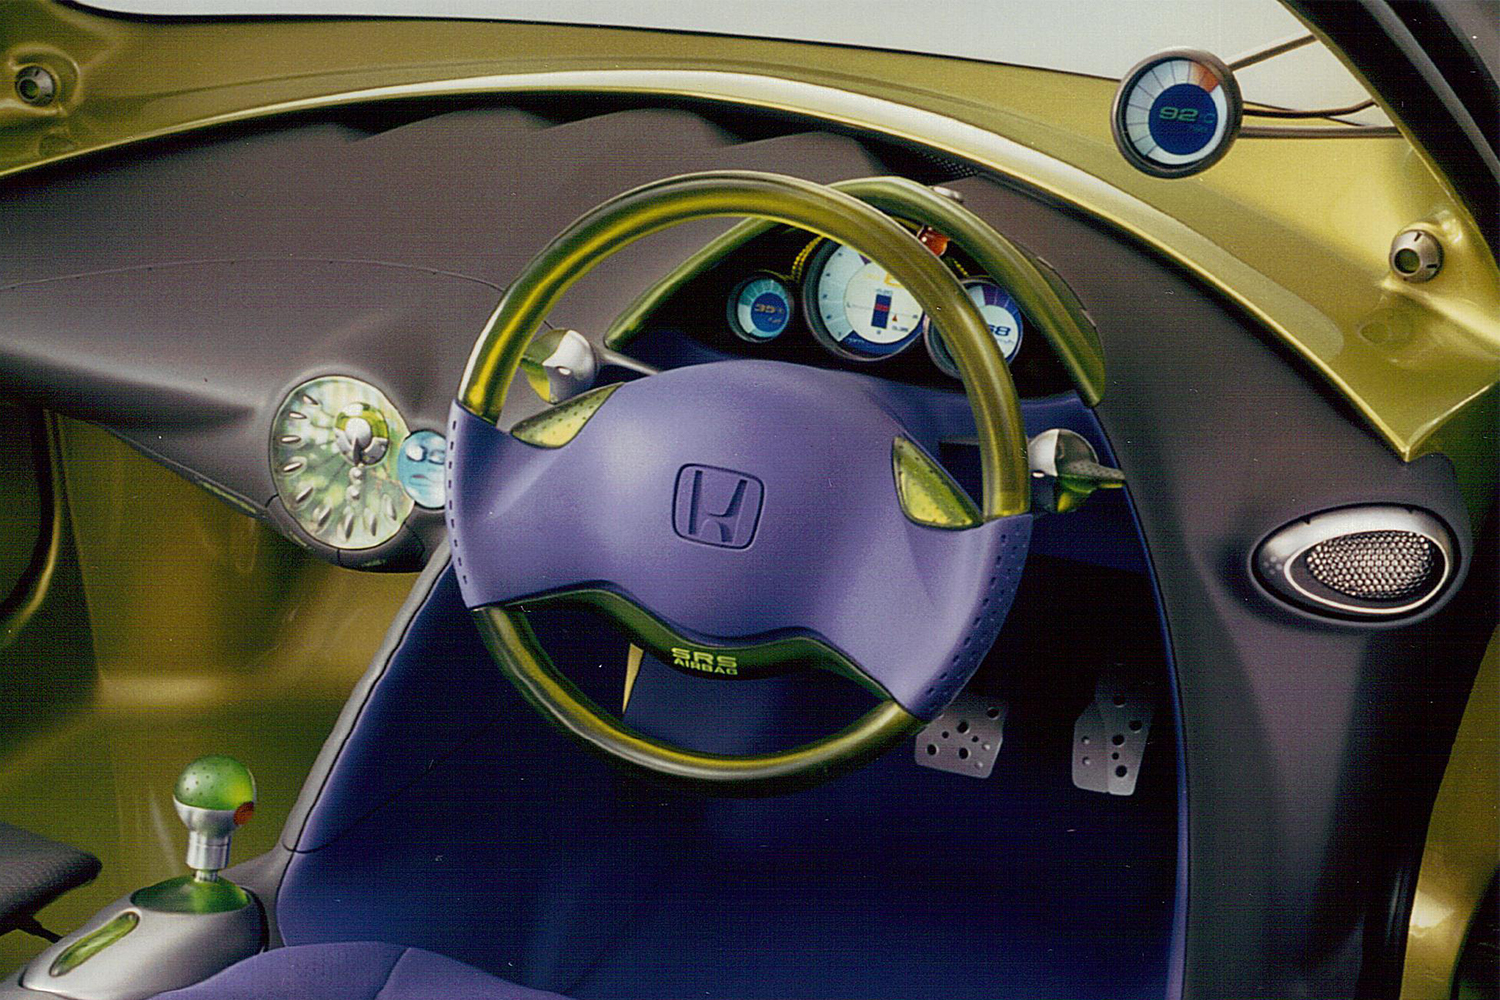 The interior of the Honda J-VX prototype in 1998, a hybrid sports car concept